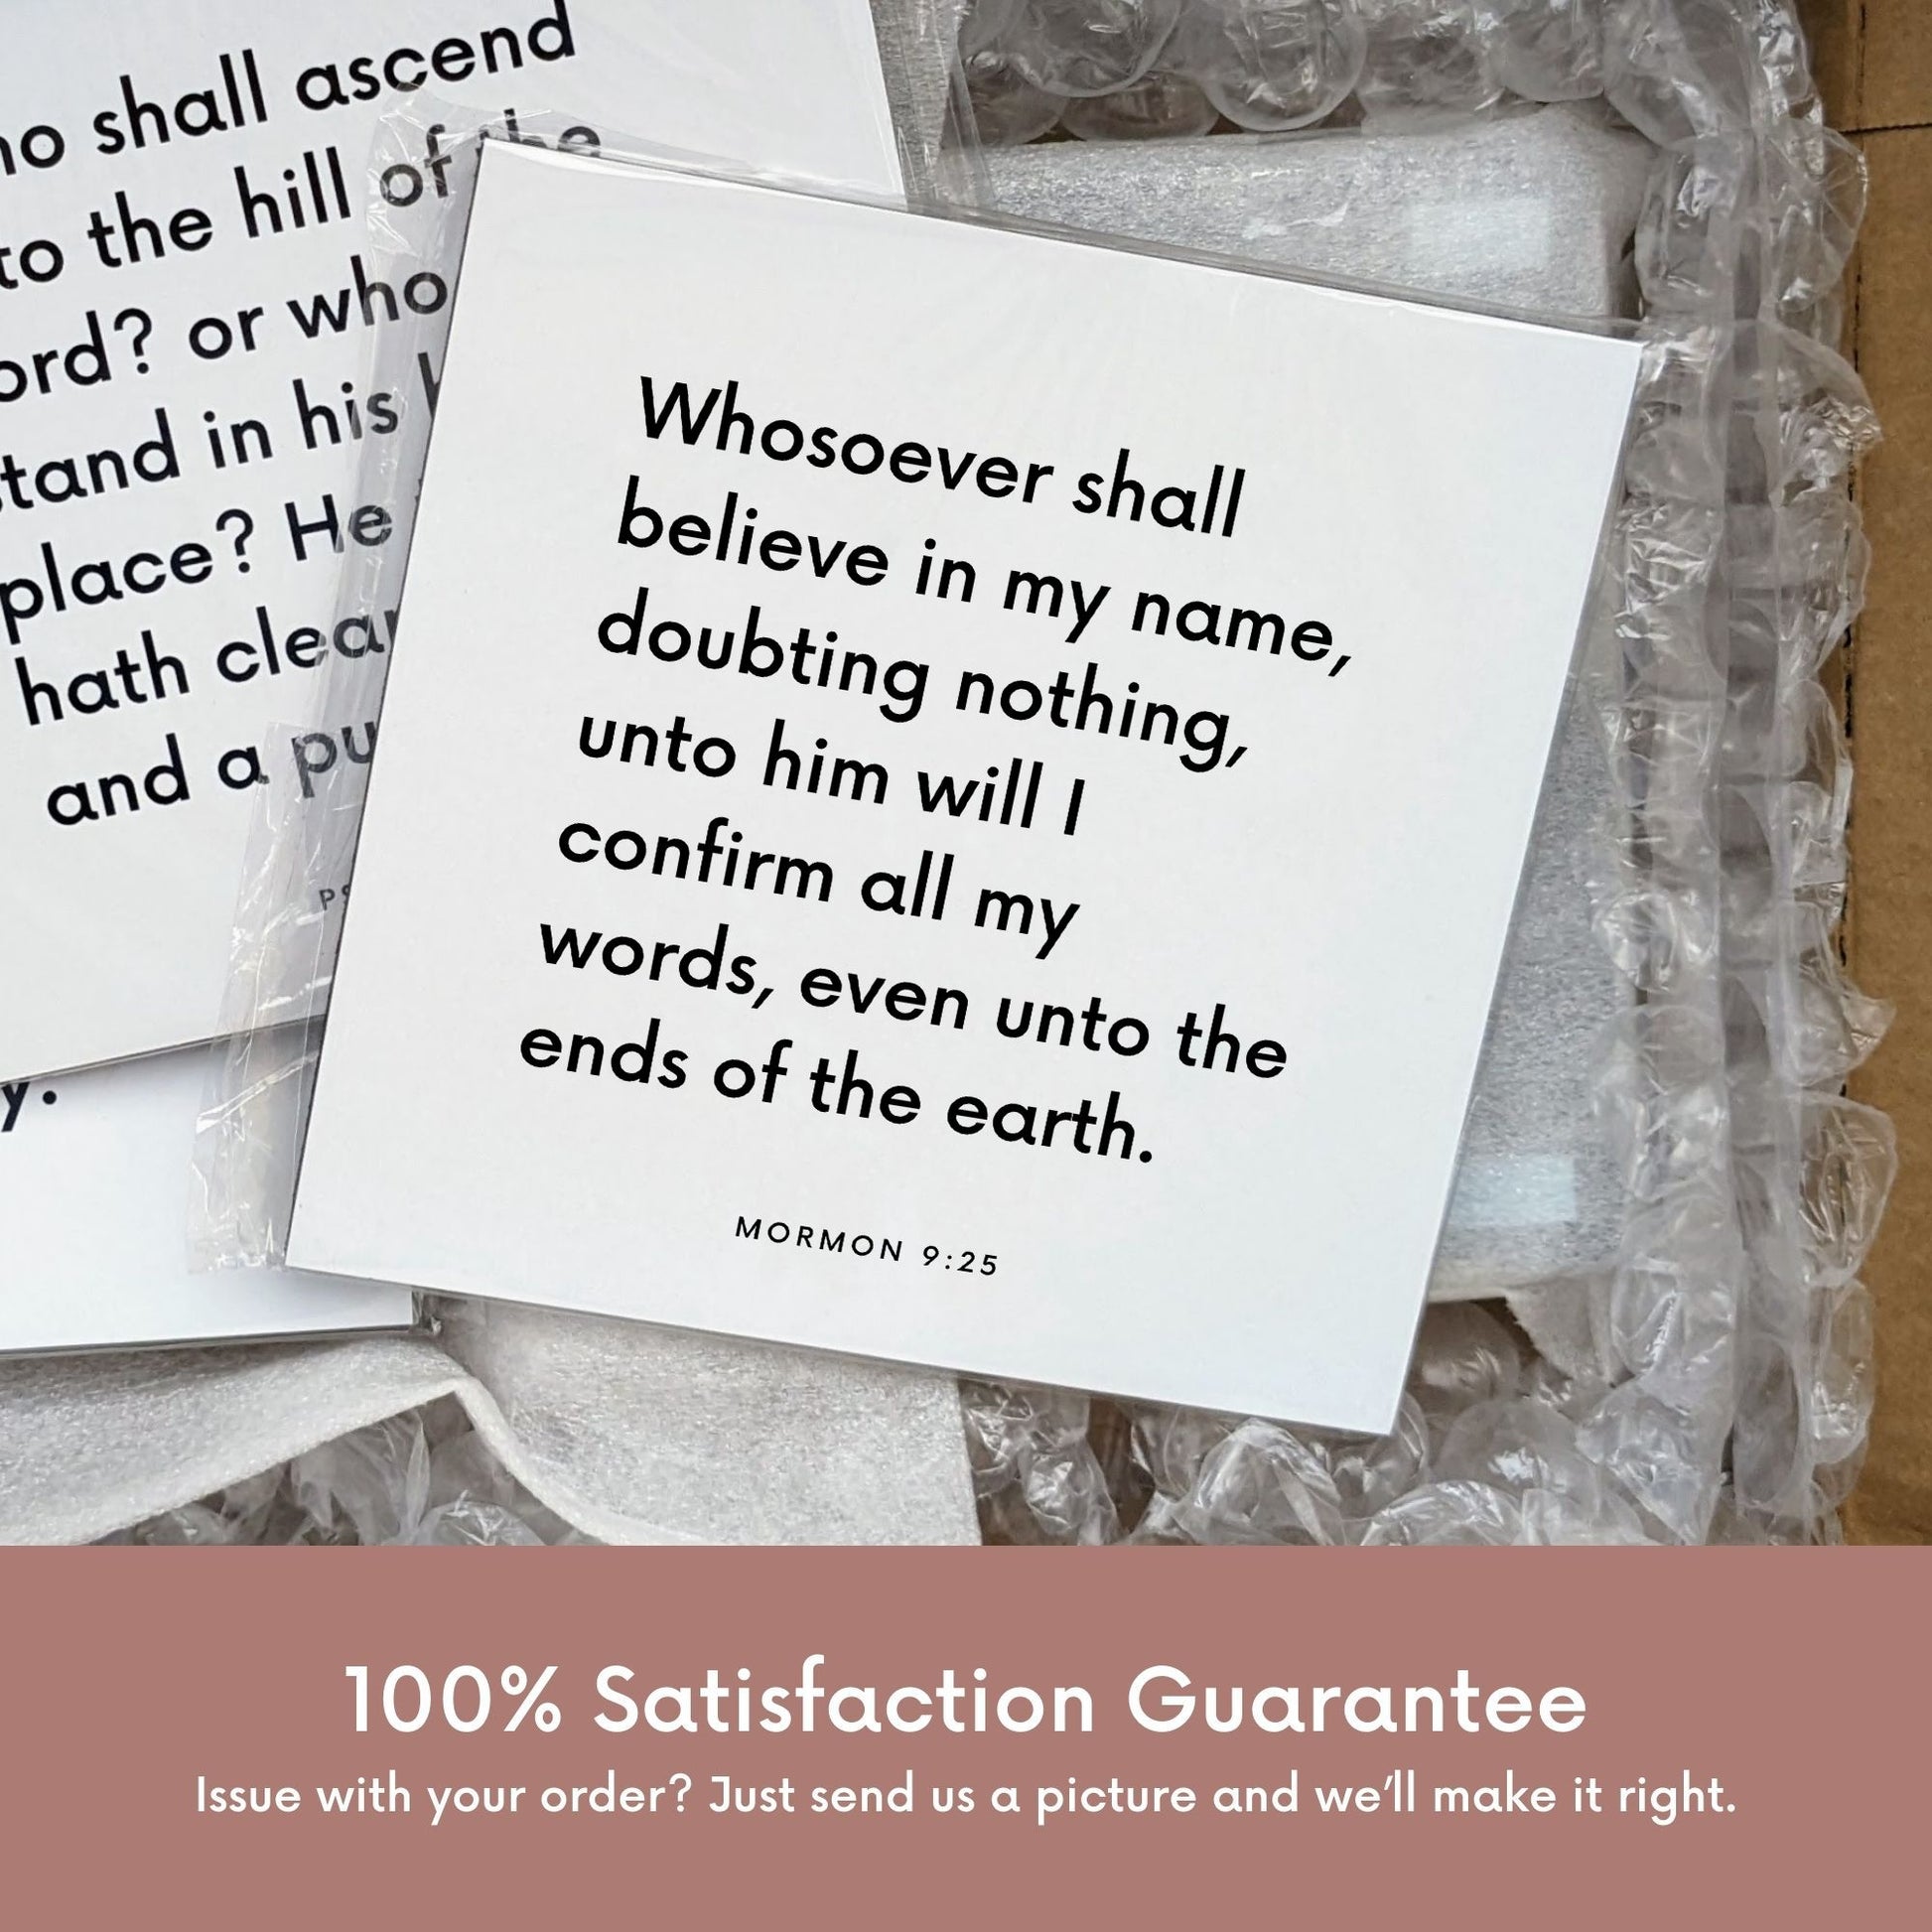 Shipping materials for scripture tile of Mormon 9:25 - "Whosoever shall believe in my name, doubting nothing"